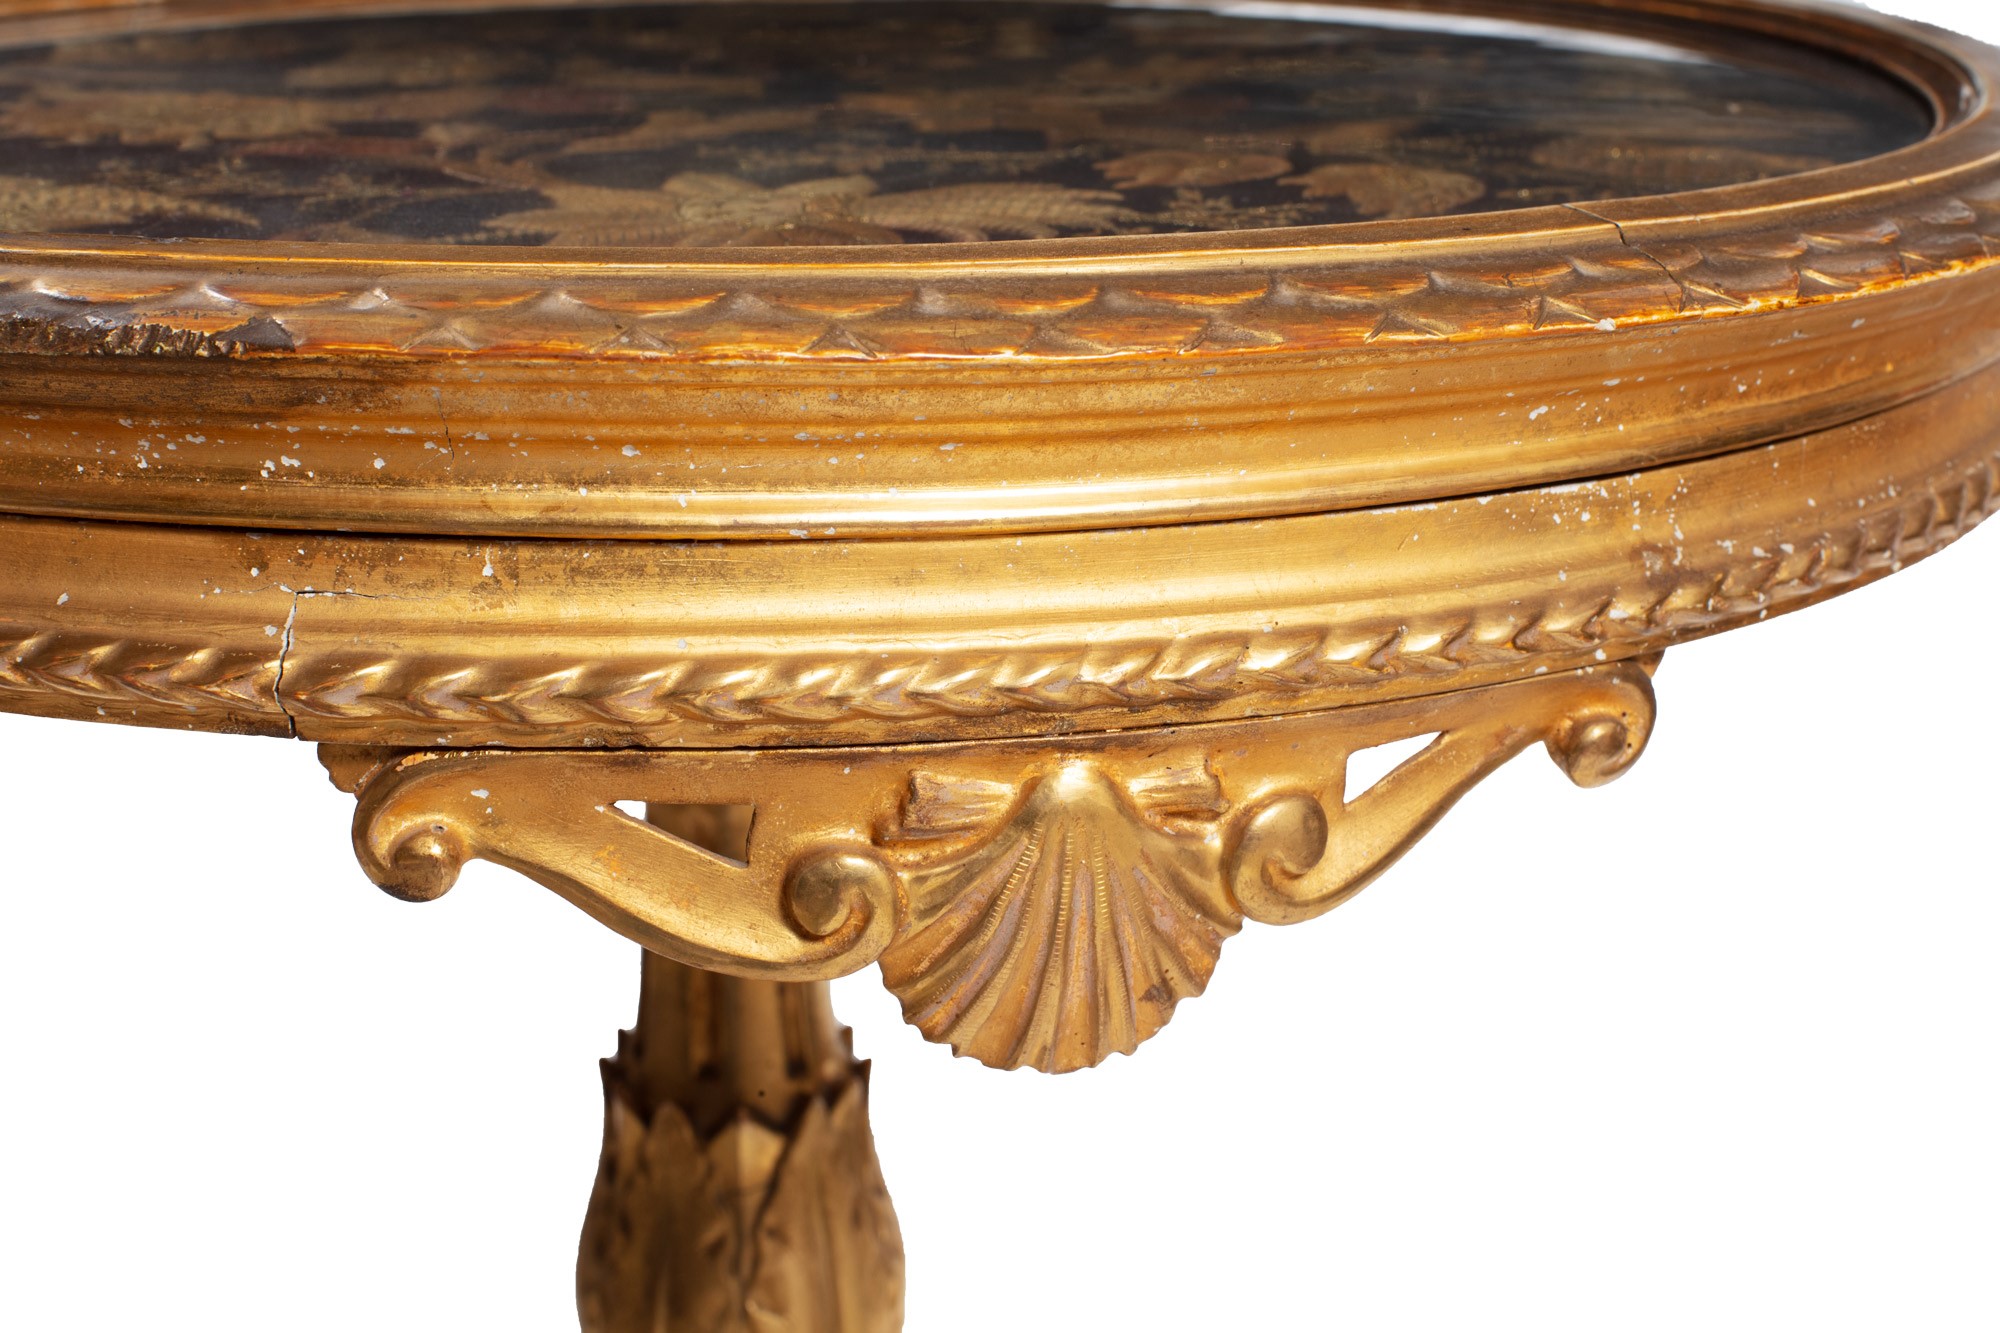 Carved and gilded wooden coffee table manifacture ligure, mid 19th century, with tripod base, - Image 3 of 8